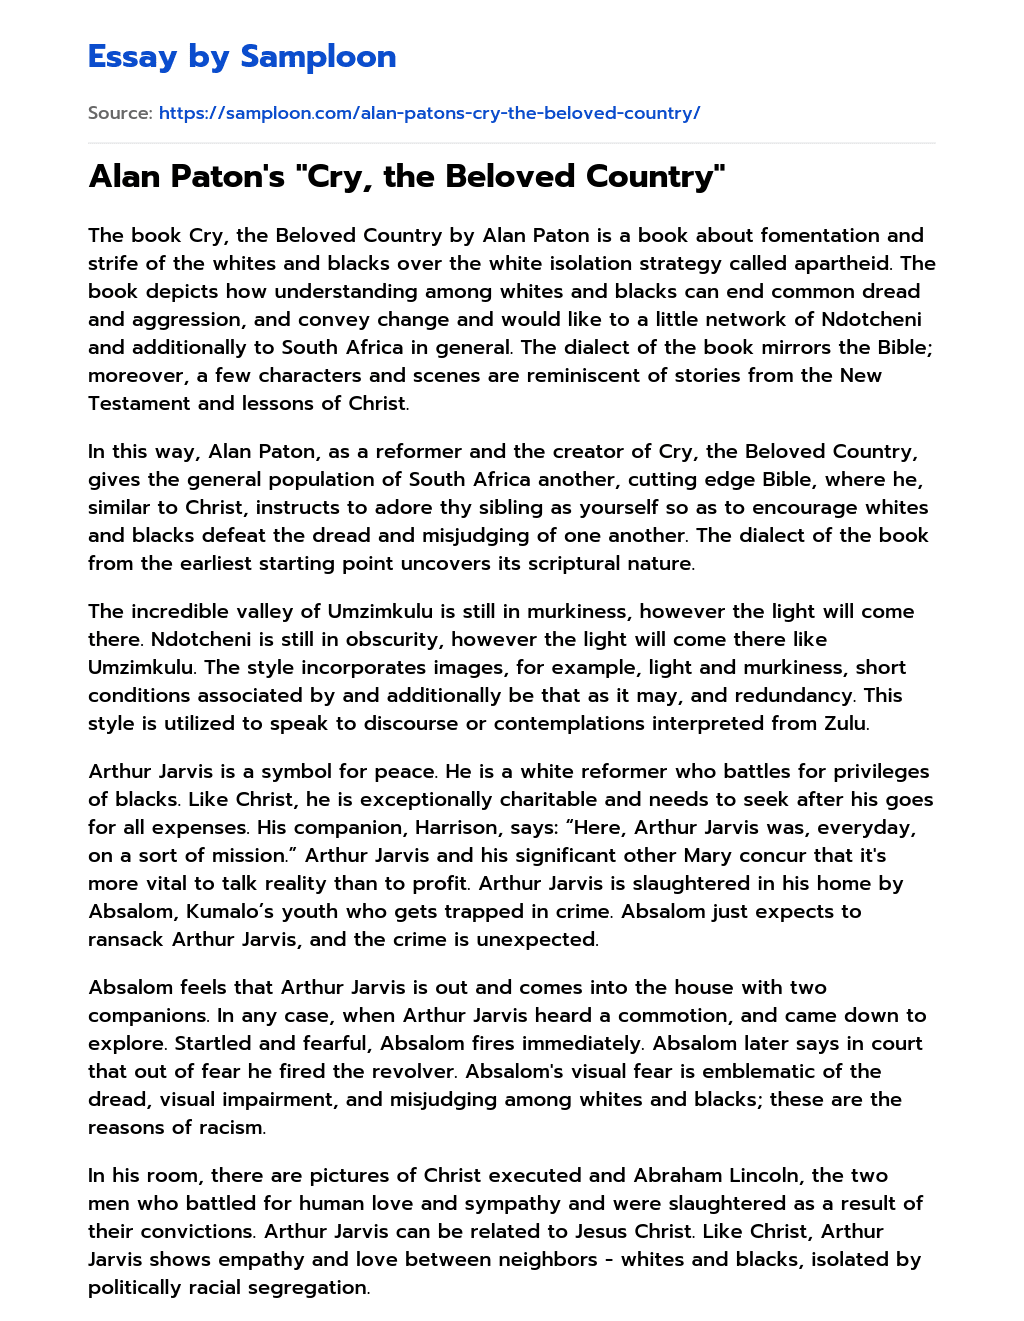 Alan Paton’s “Cry, the Beloved Country” essay